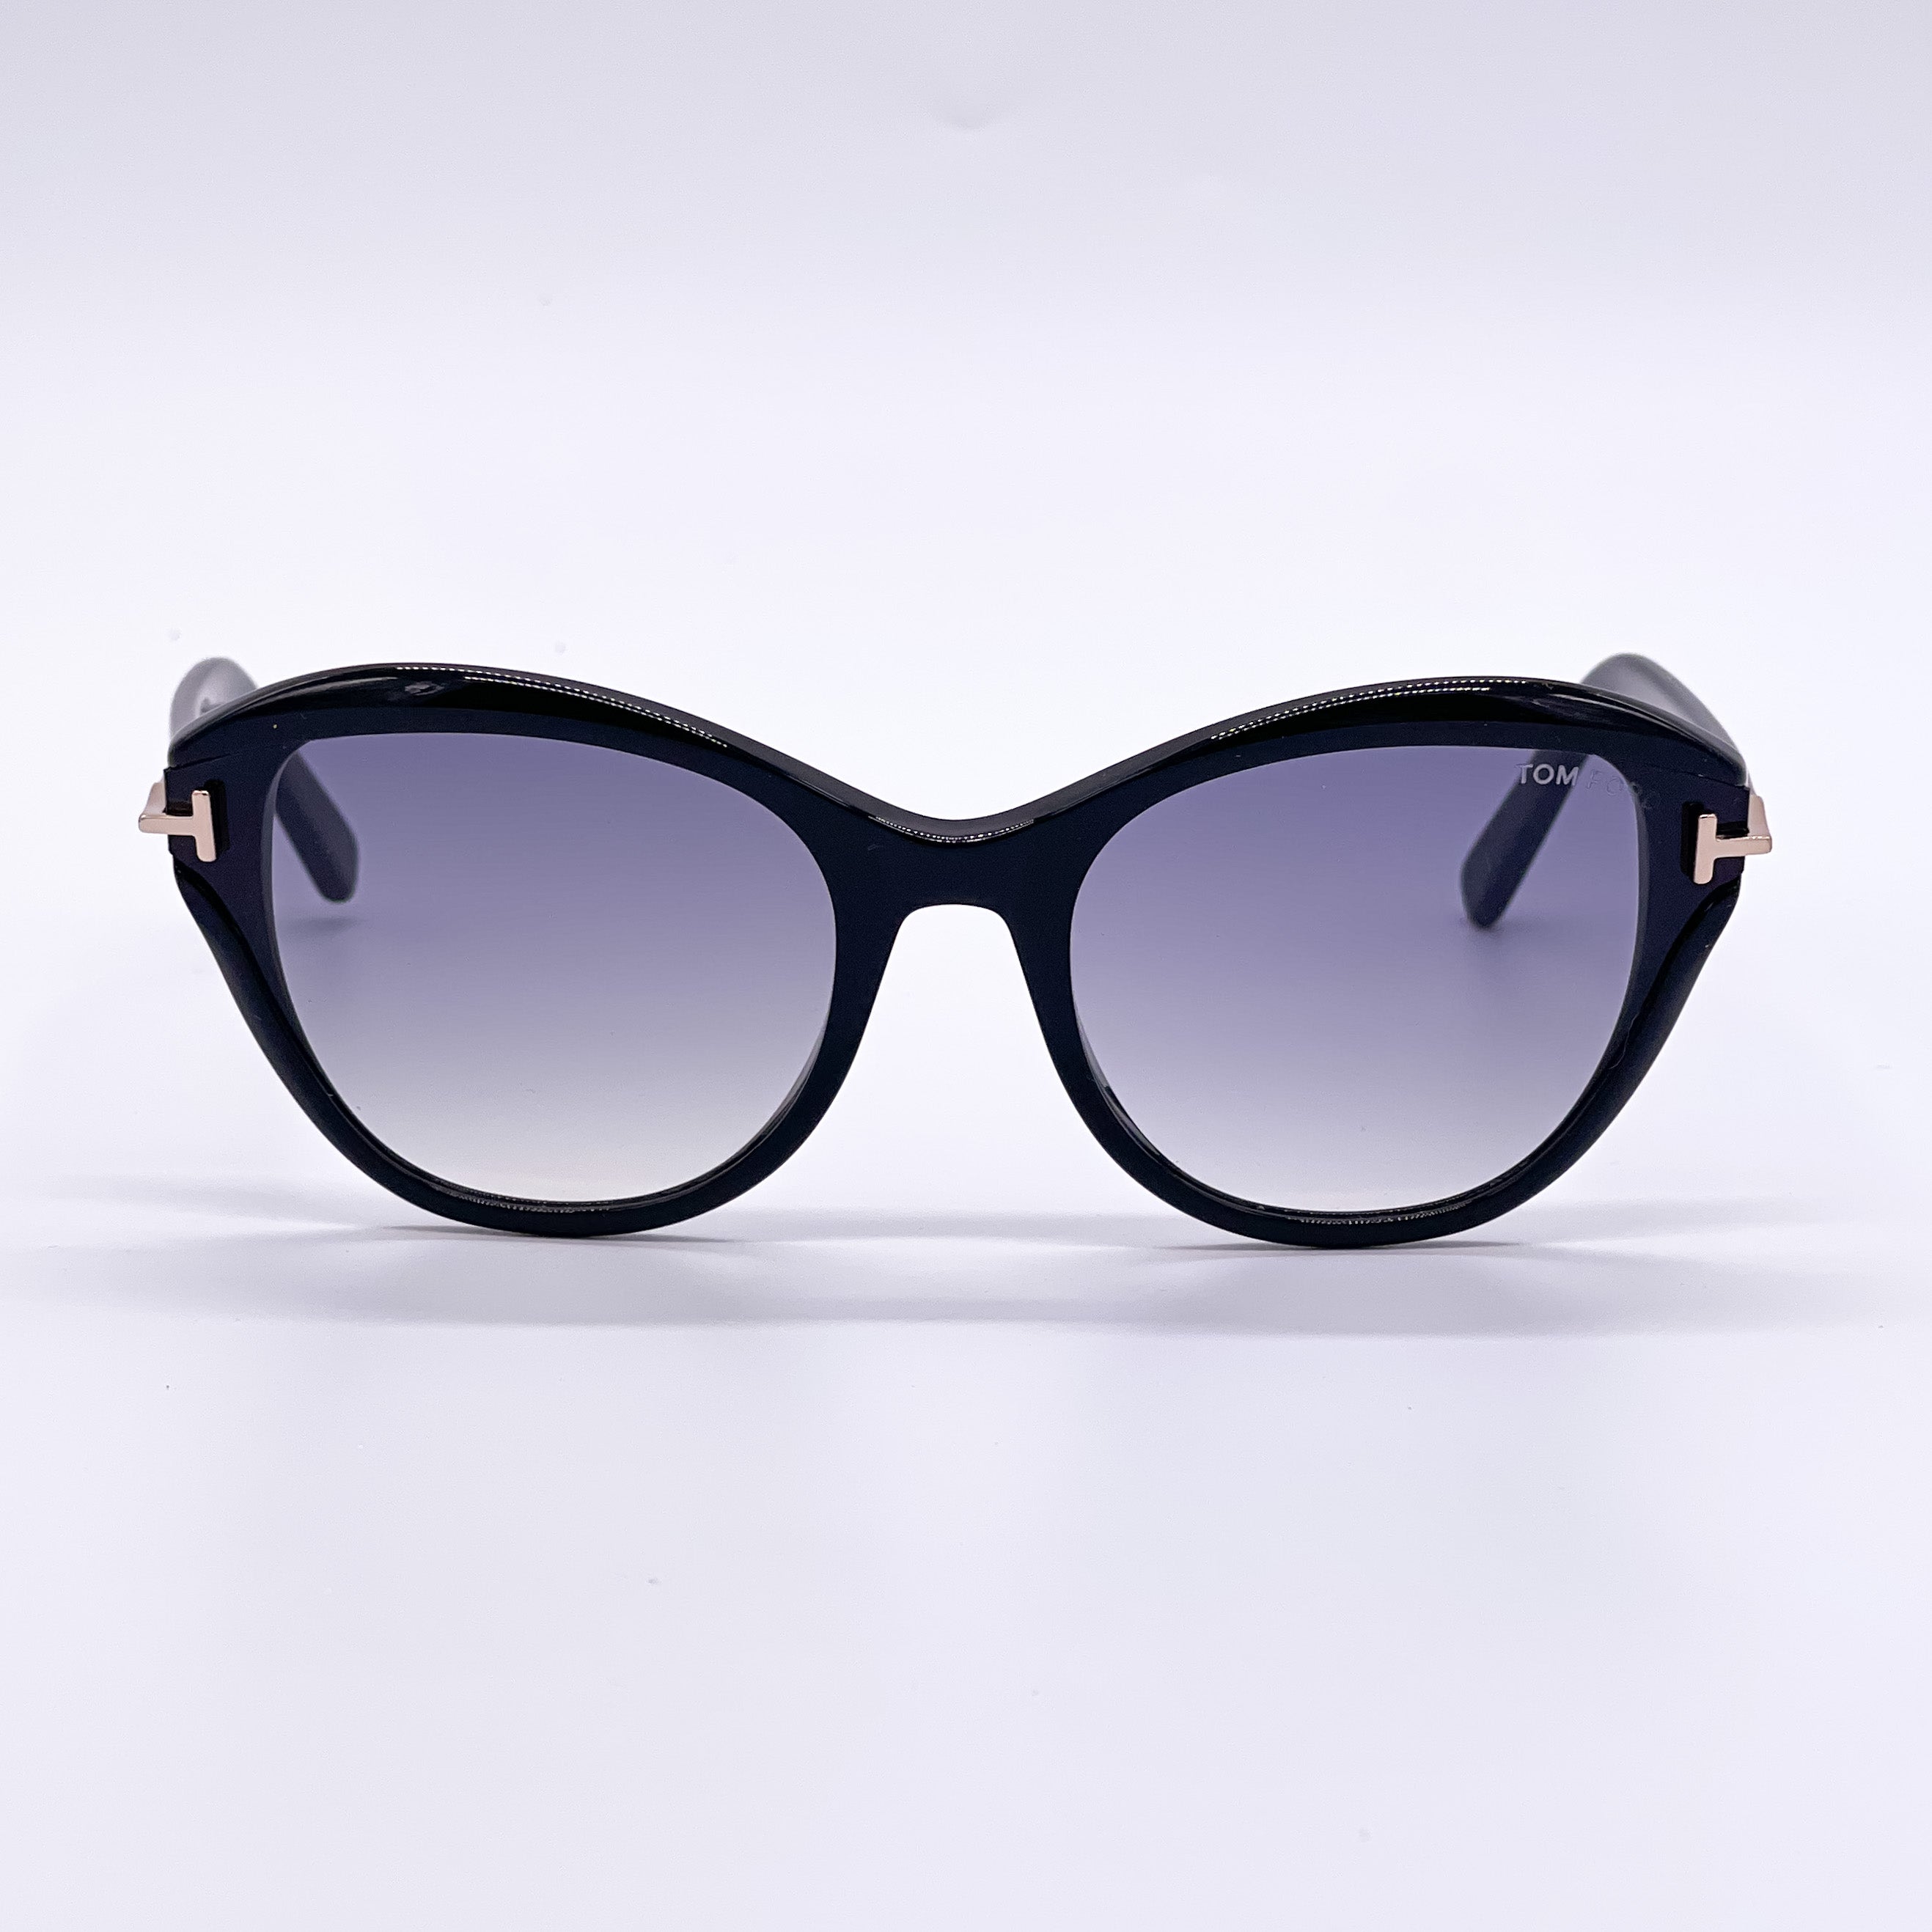 TOM FORD LEIGH TF850 01B SUNGLASSES FT0850/S